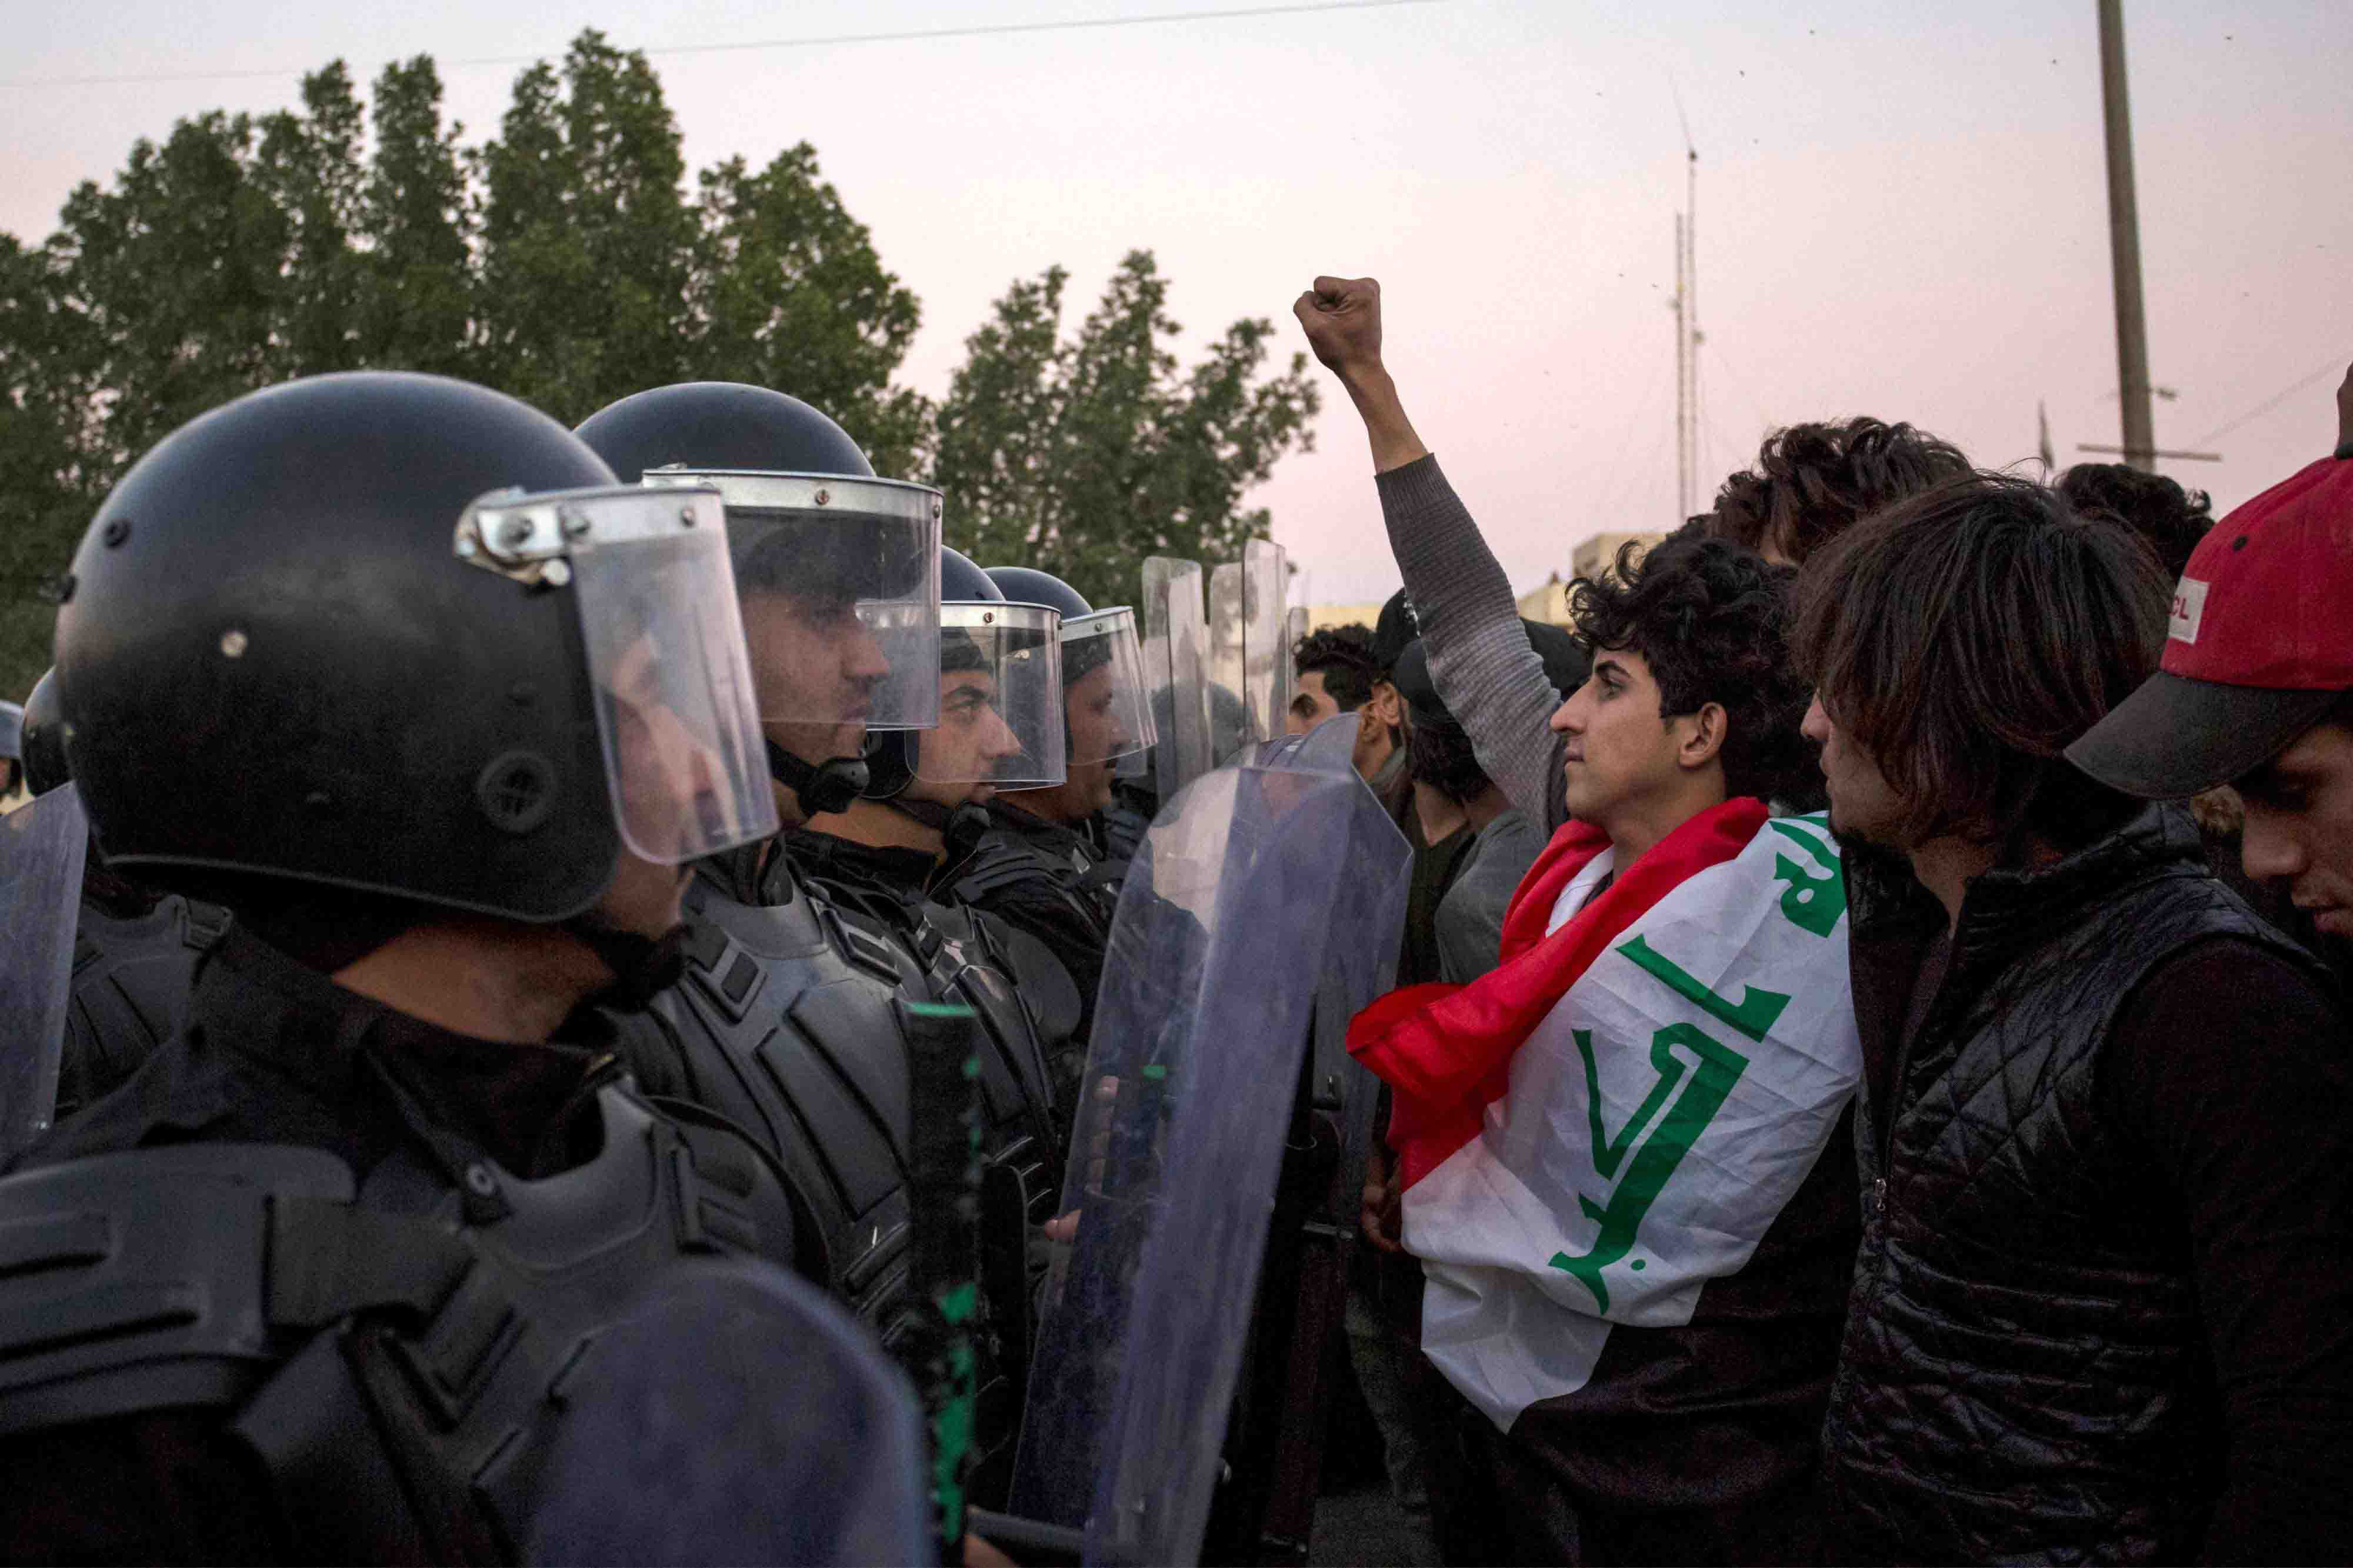 Iraqi security forces confront protesters demonstrating against government policies and lack of basic services in Basra, January 4